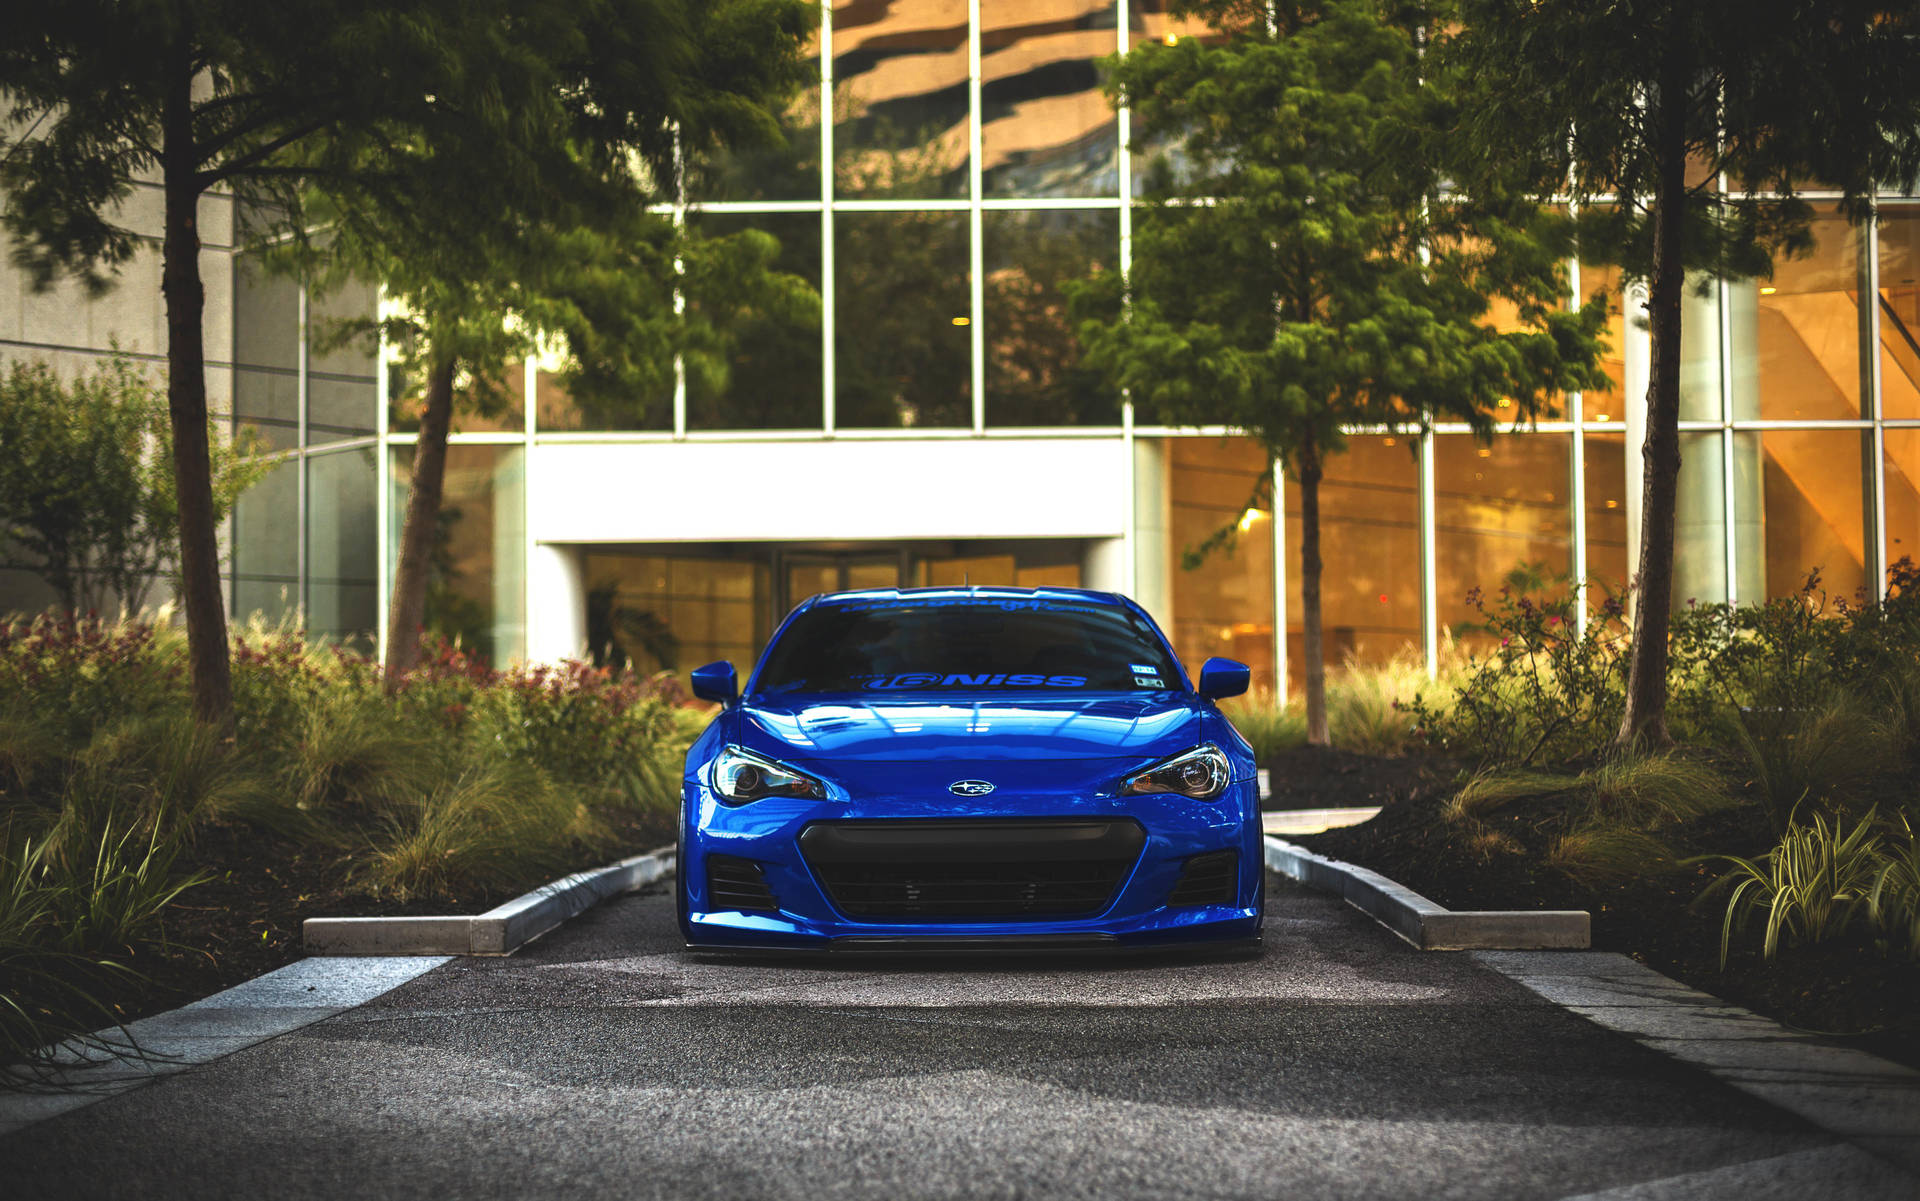 Brz Driving By The Plants Wallpaper